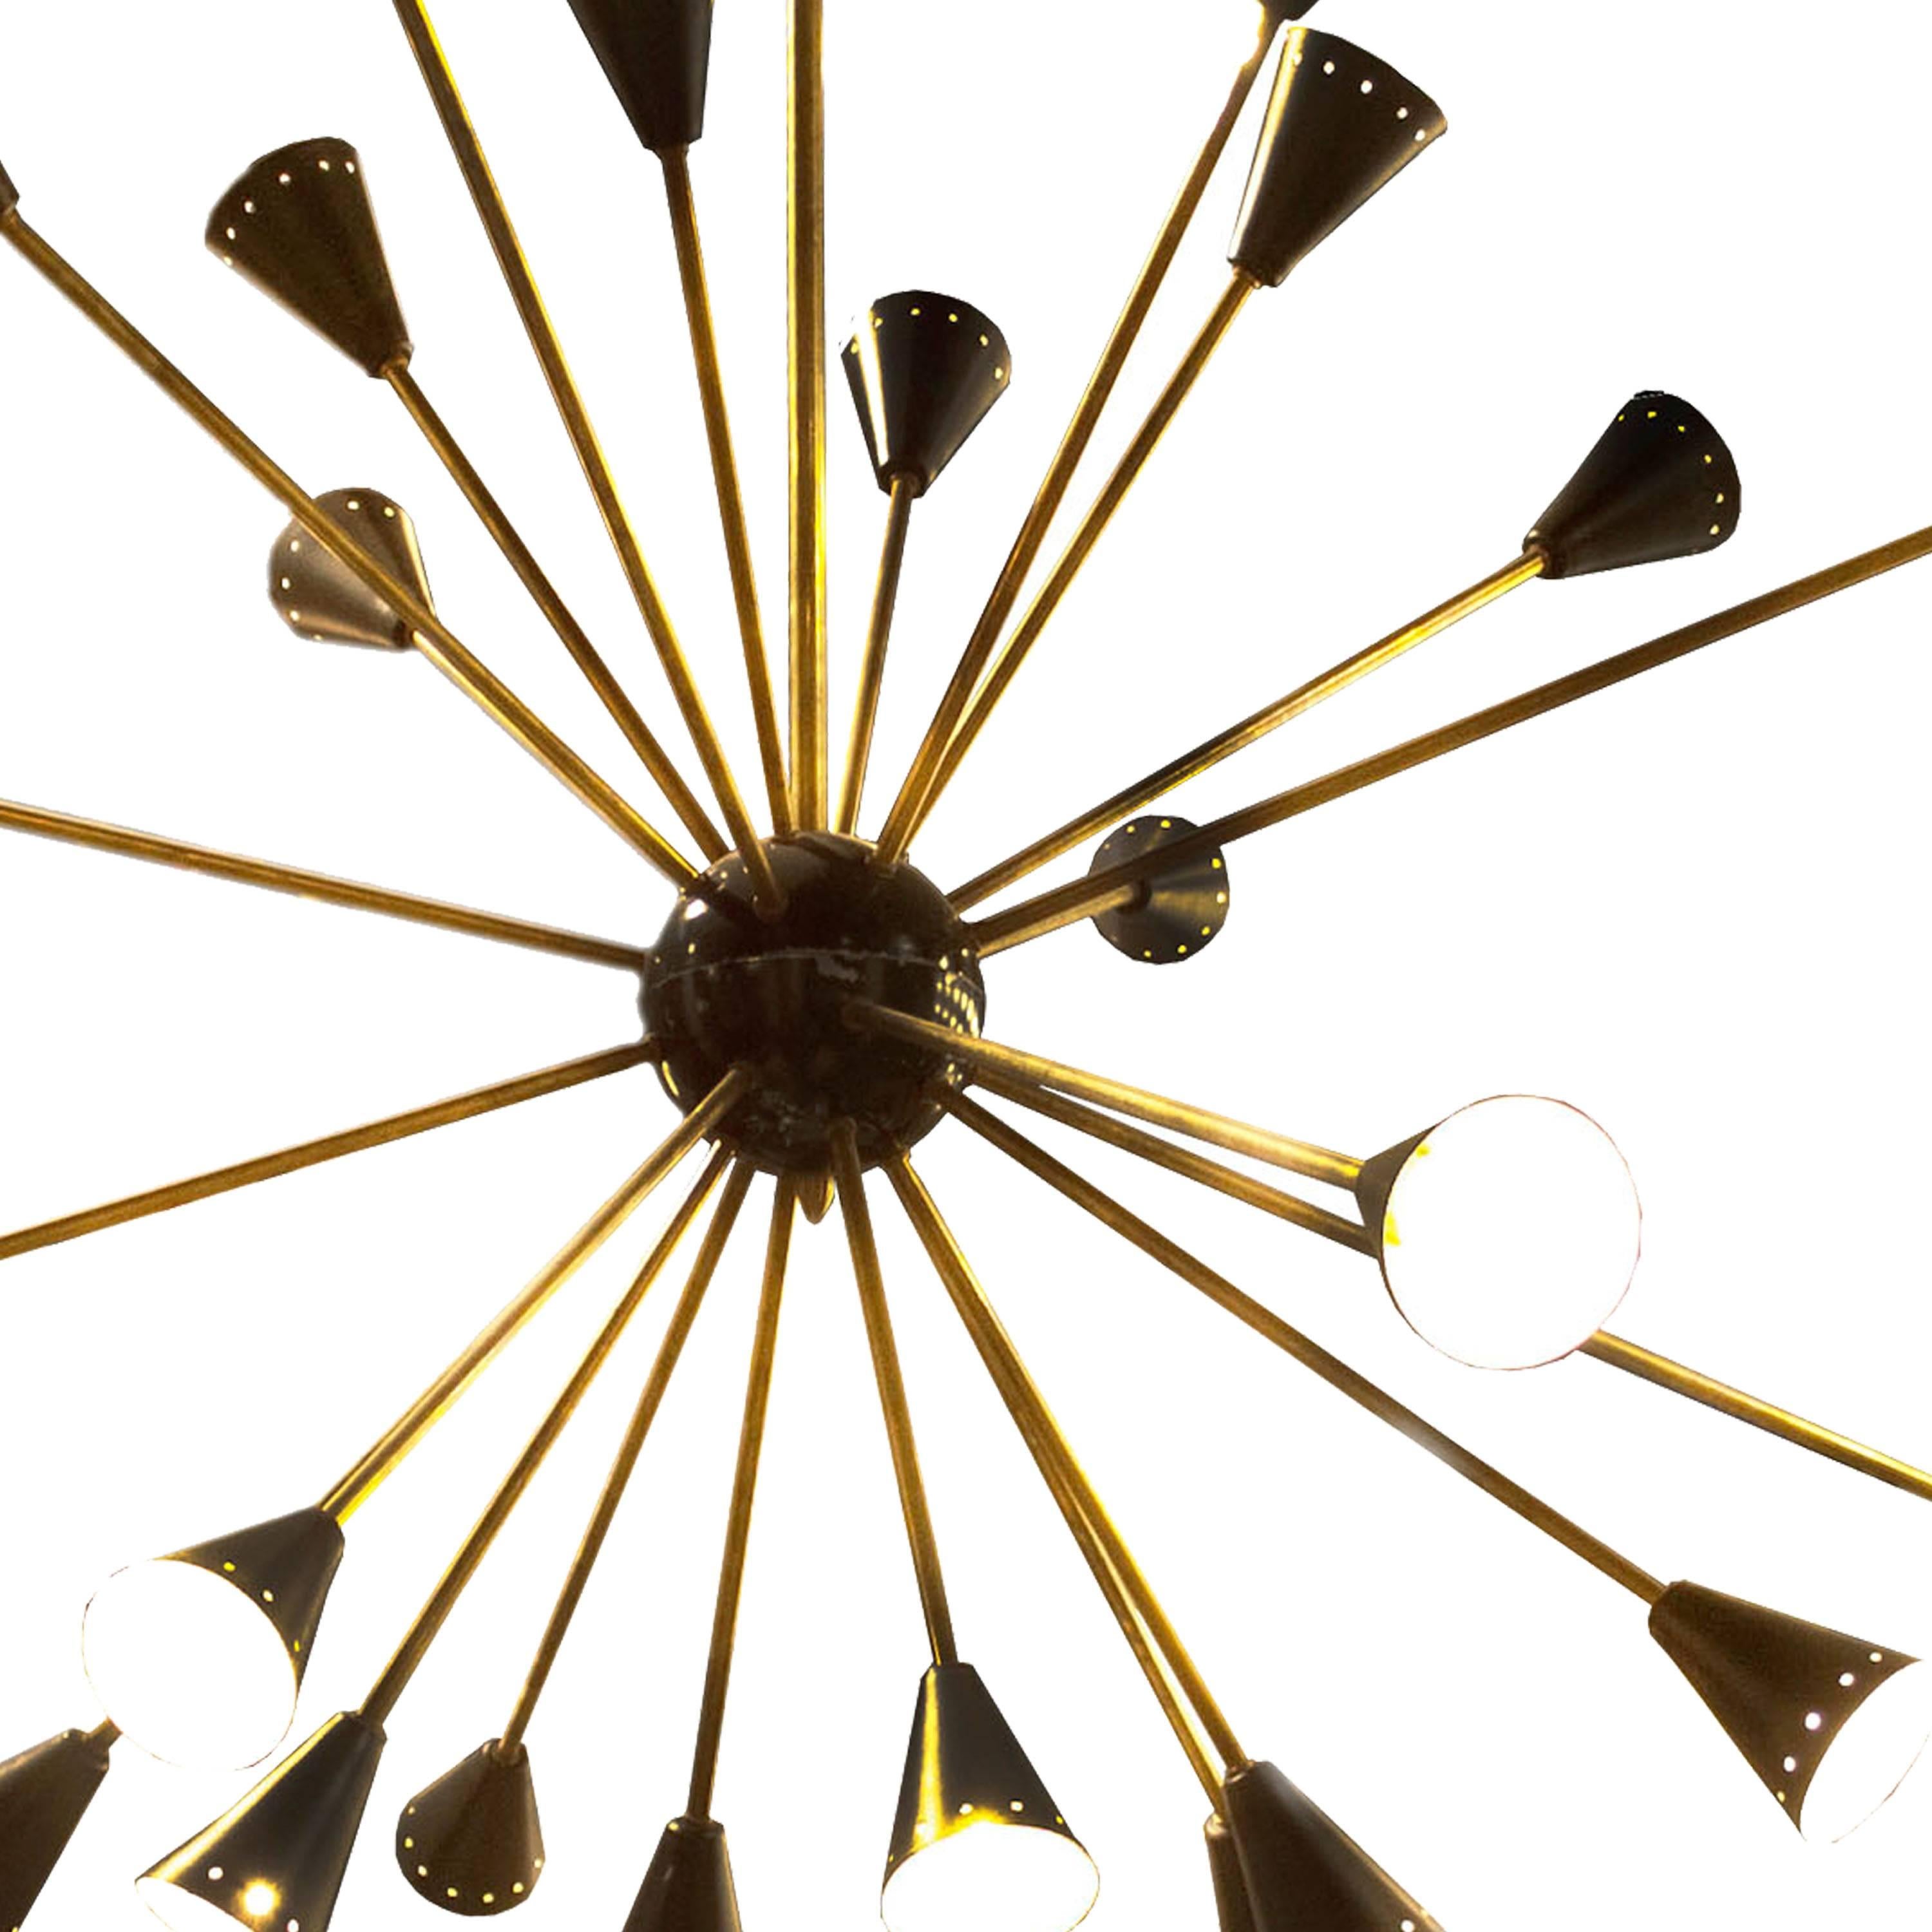 Lamp model Sputnik with 16 points of light with structure realized in brass finished in conical screens lacquered in different colors around a metallic sphere of brass.